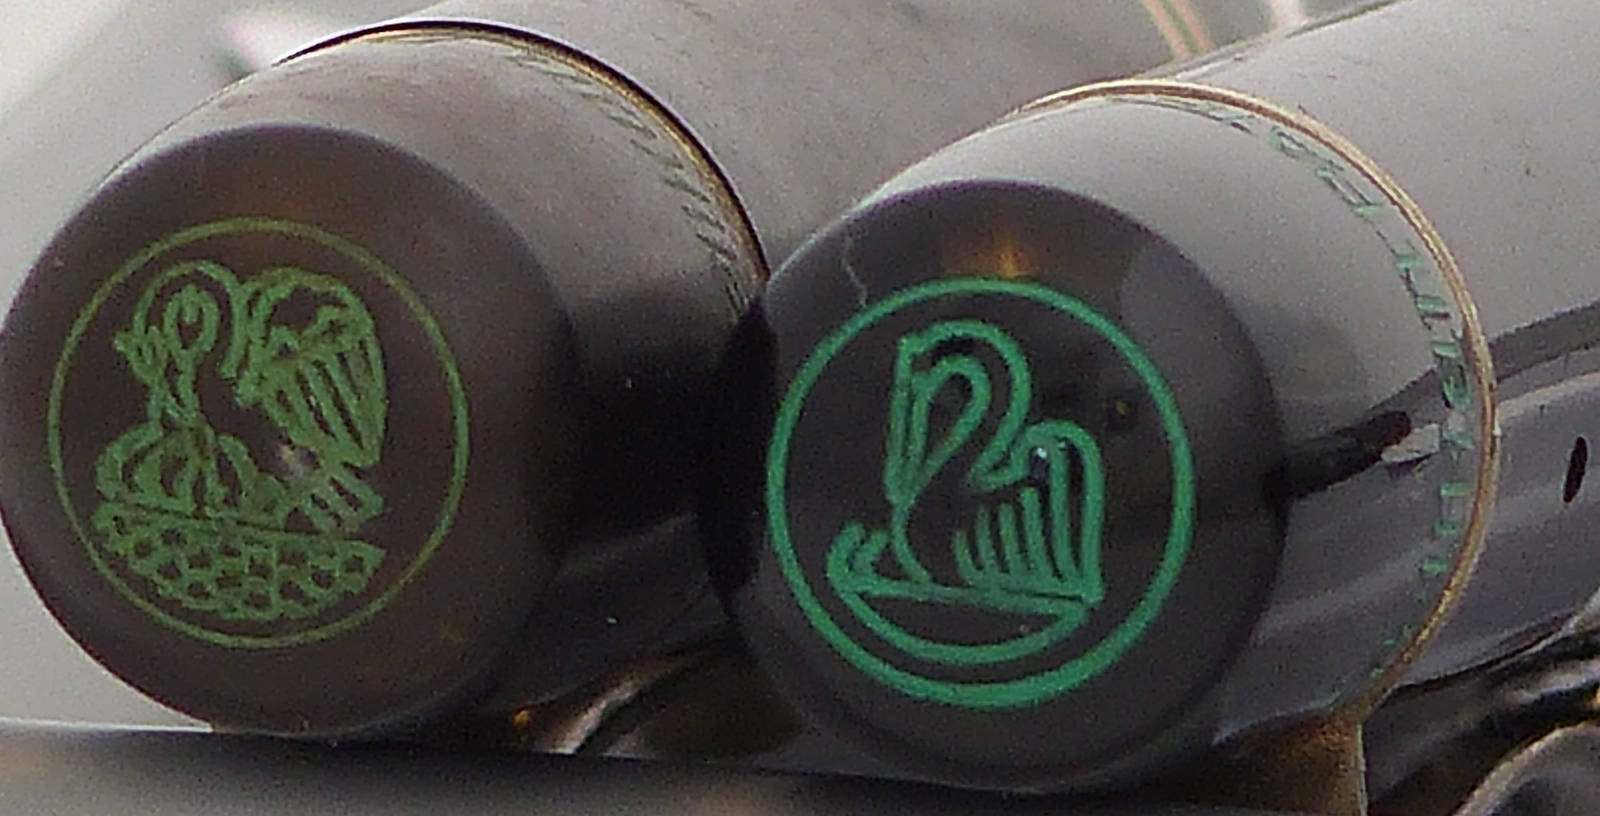 left; old 4-chick logo, right; 2-chick logo as of 1937